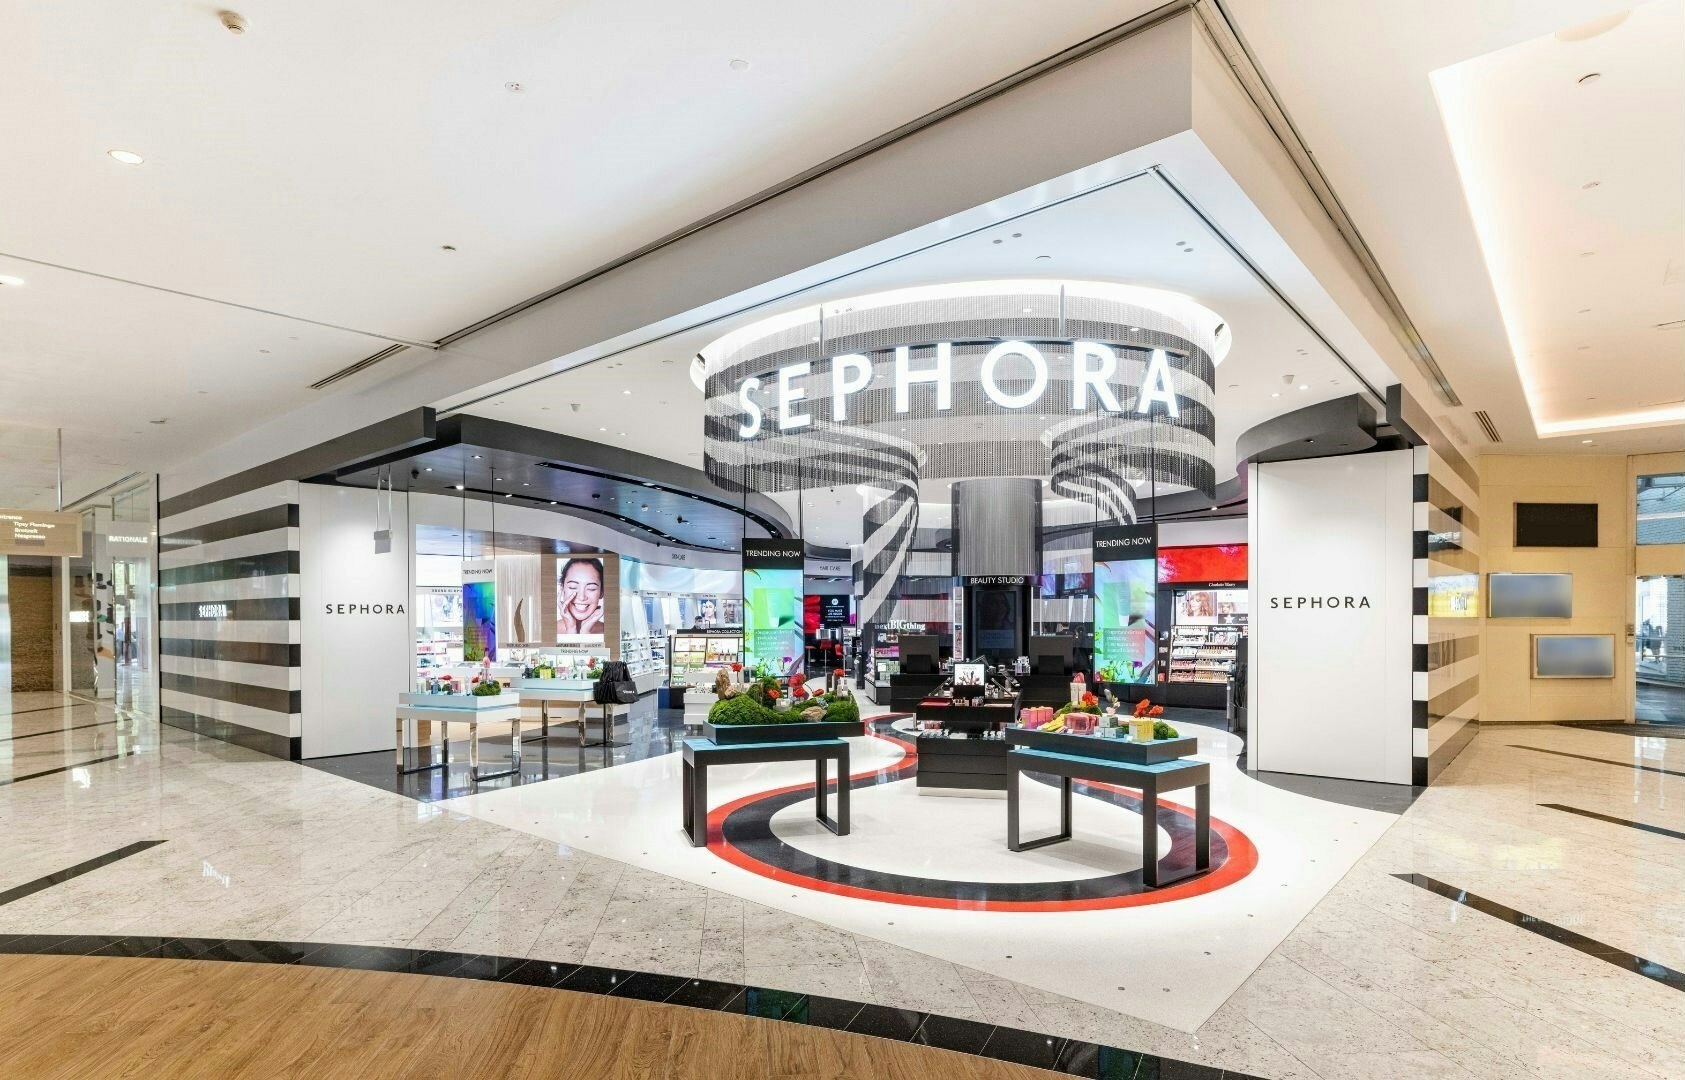 Sephora CTO uncovers how the beauty retailer is adjusting for COVID-19